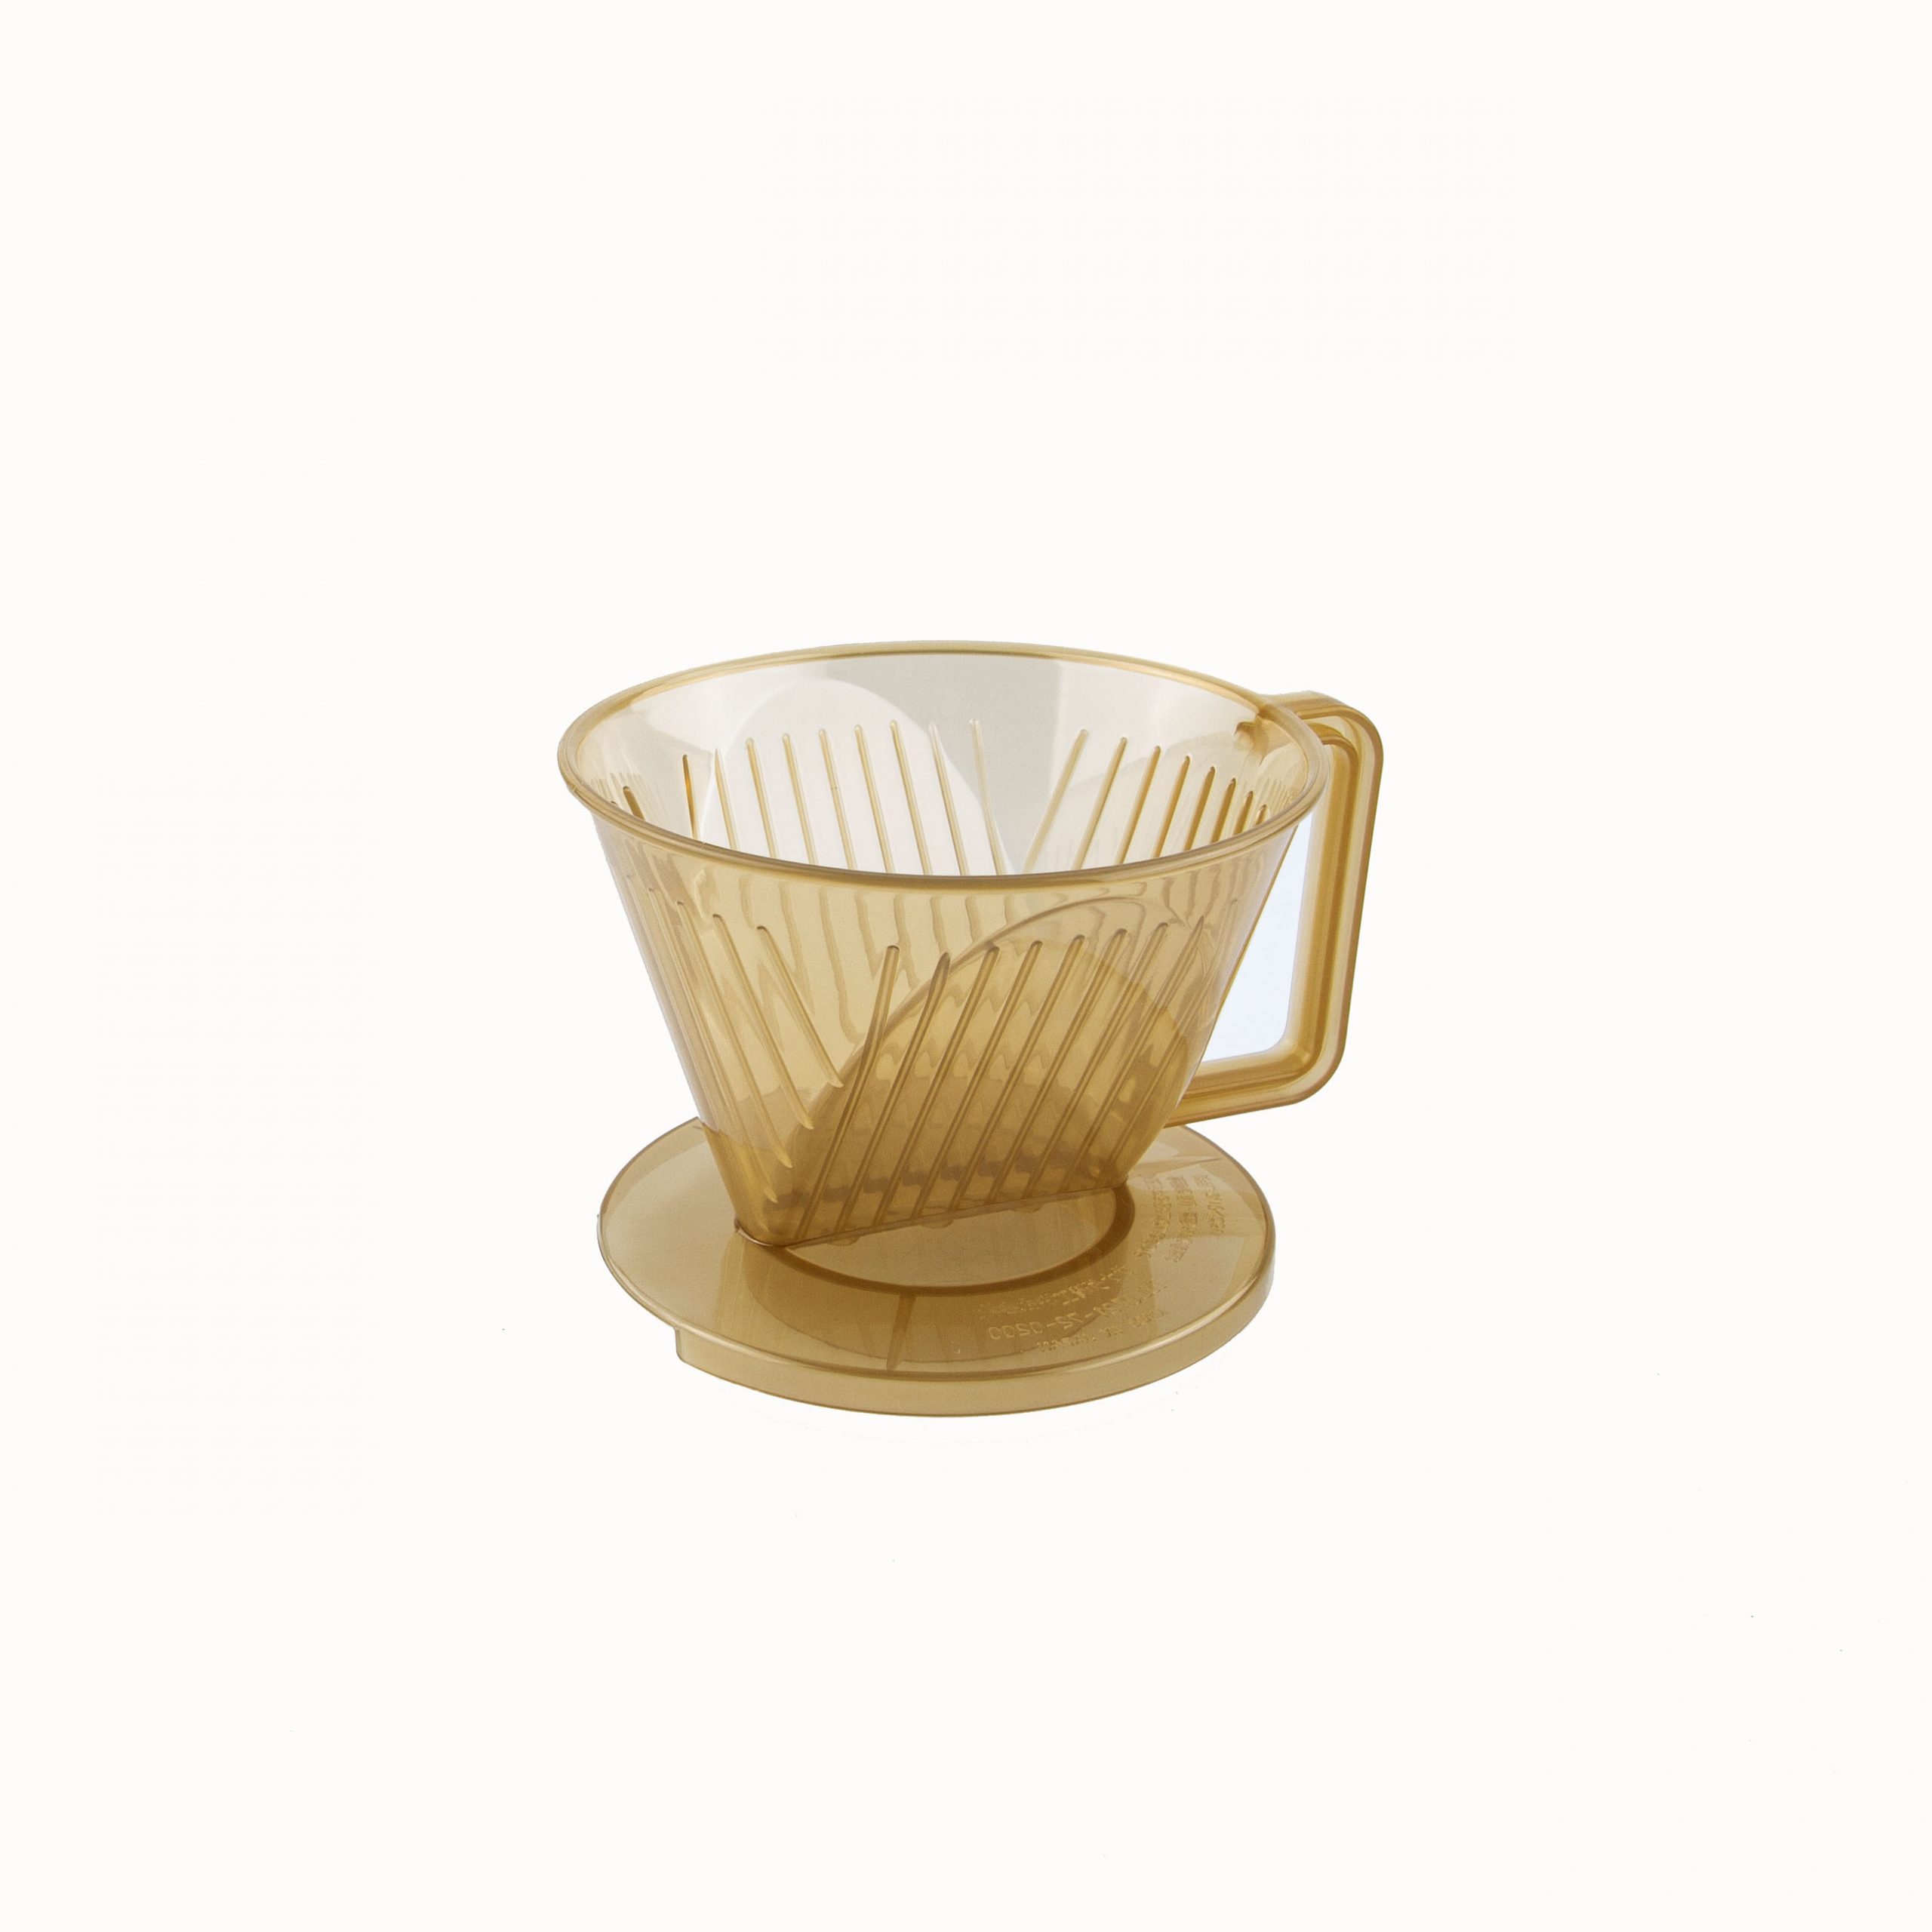 https://www.homeplus.cl/wp-content/uploads/2022/02/3079-BASE-FILTRO-CAFE%CC%81-COFFE-DRIPPER-2-4-CAFE%CC%81-2590-1850-scaled.jpg